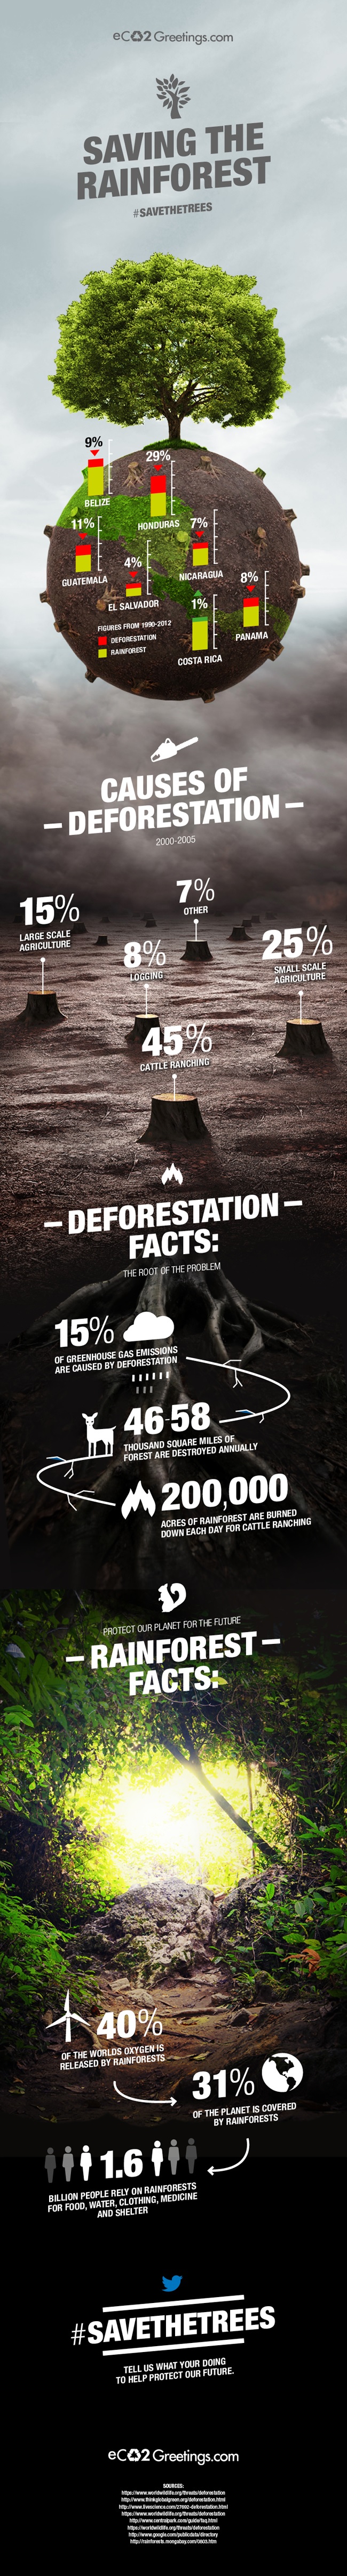 alarming facts about deforestation infographic